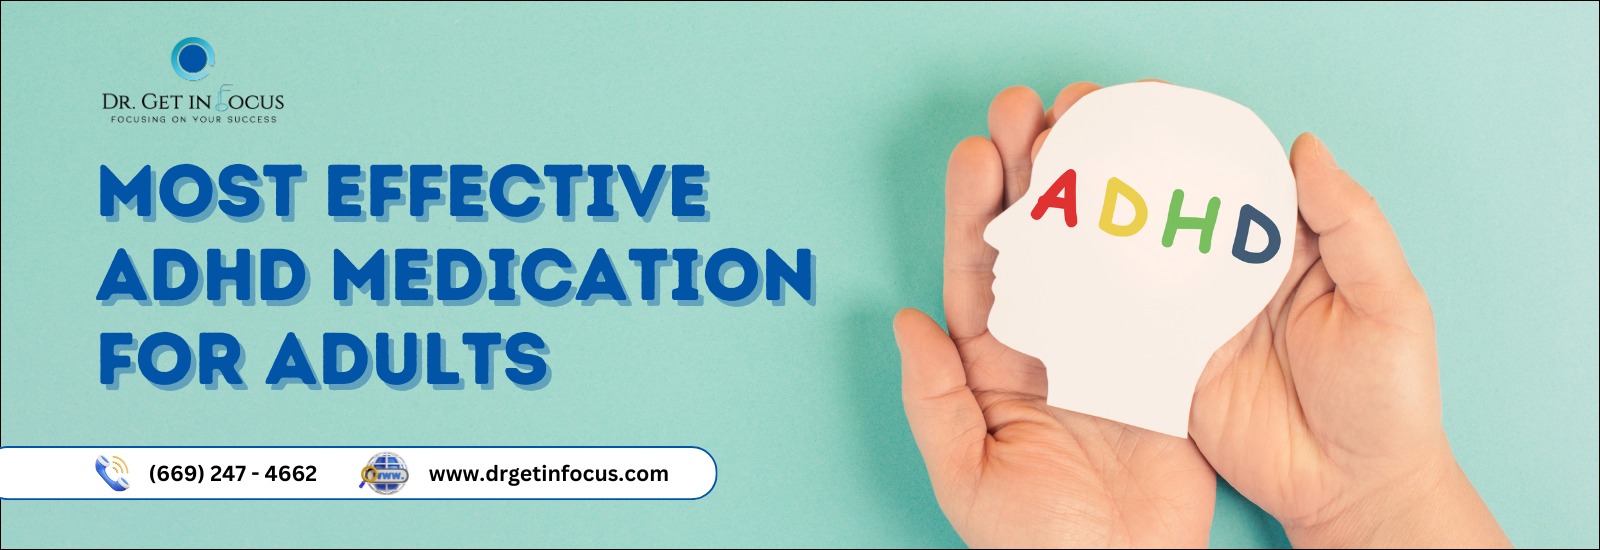 Most Effective Adhd Medication for Adults | Dr Get in Focus